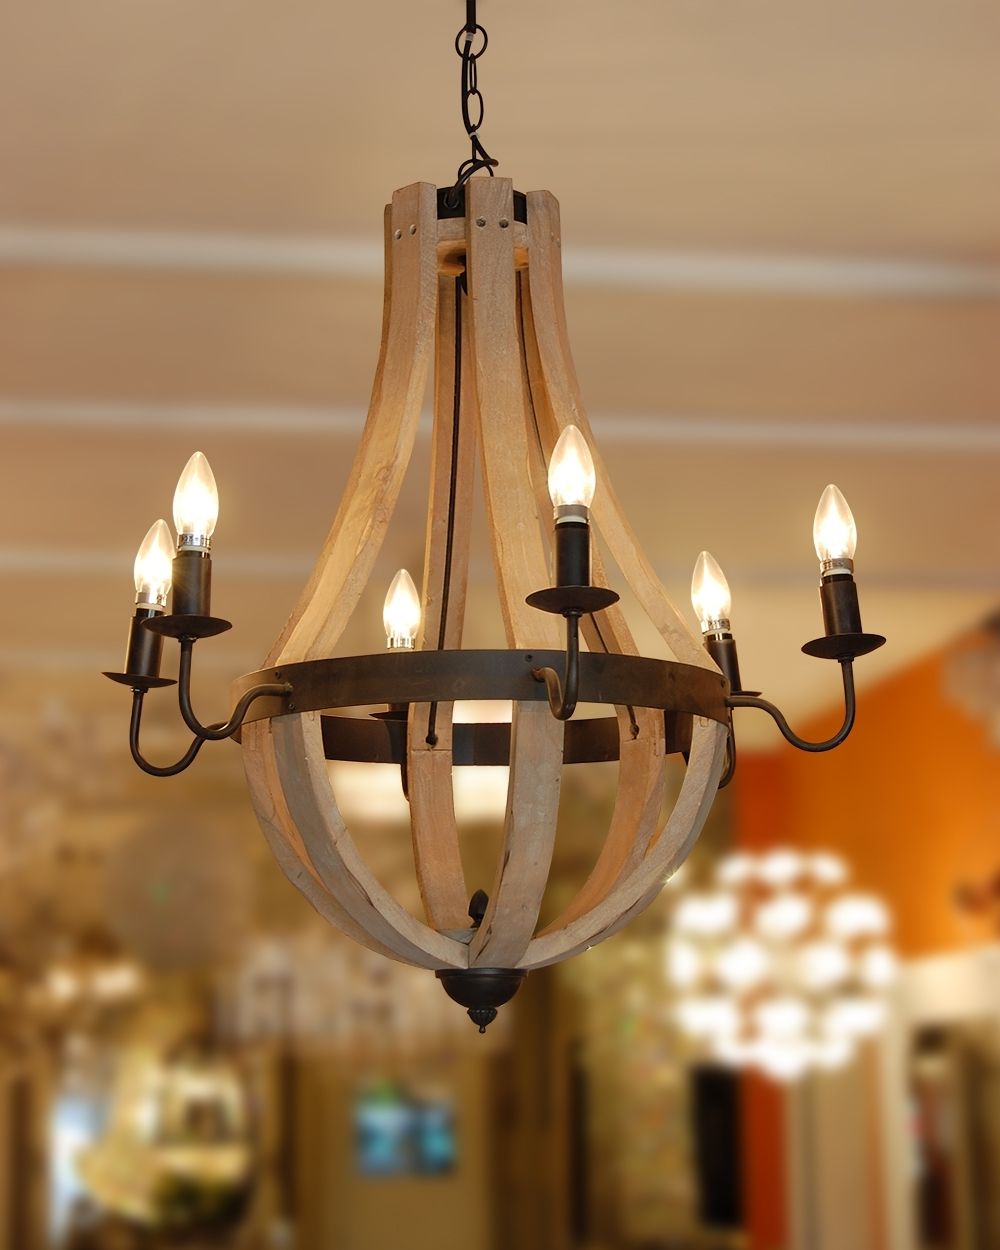 The Chandelier & Mirror Company Pertaining To Favorite Wooden Chandeliers (View 1 of 20)